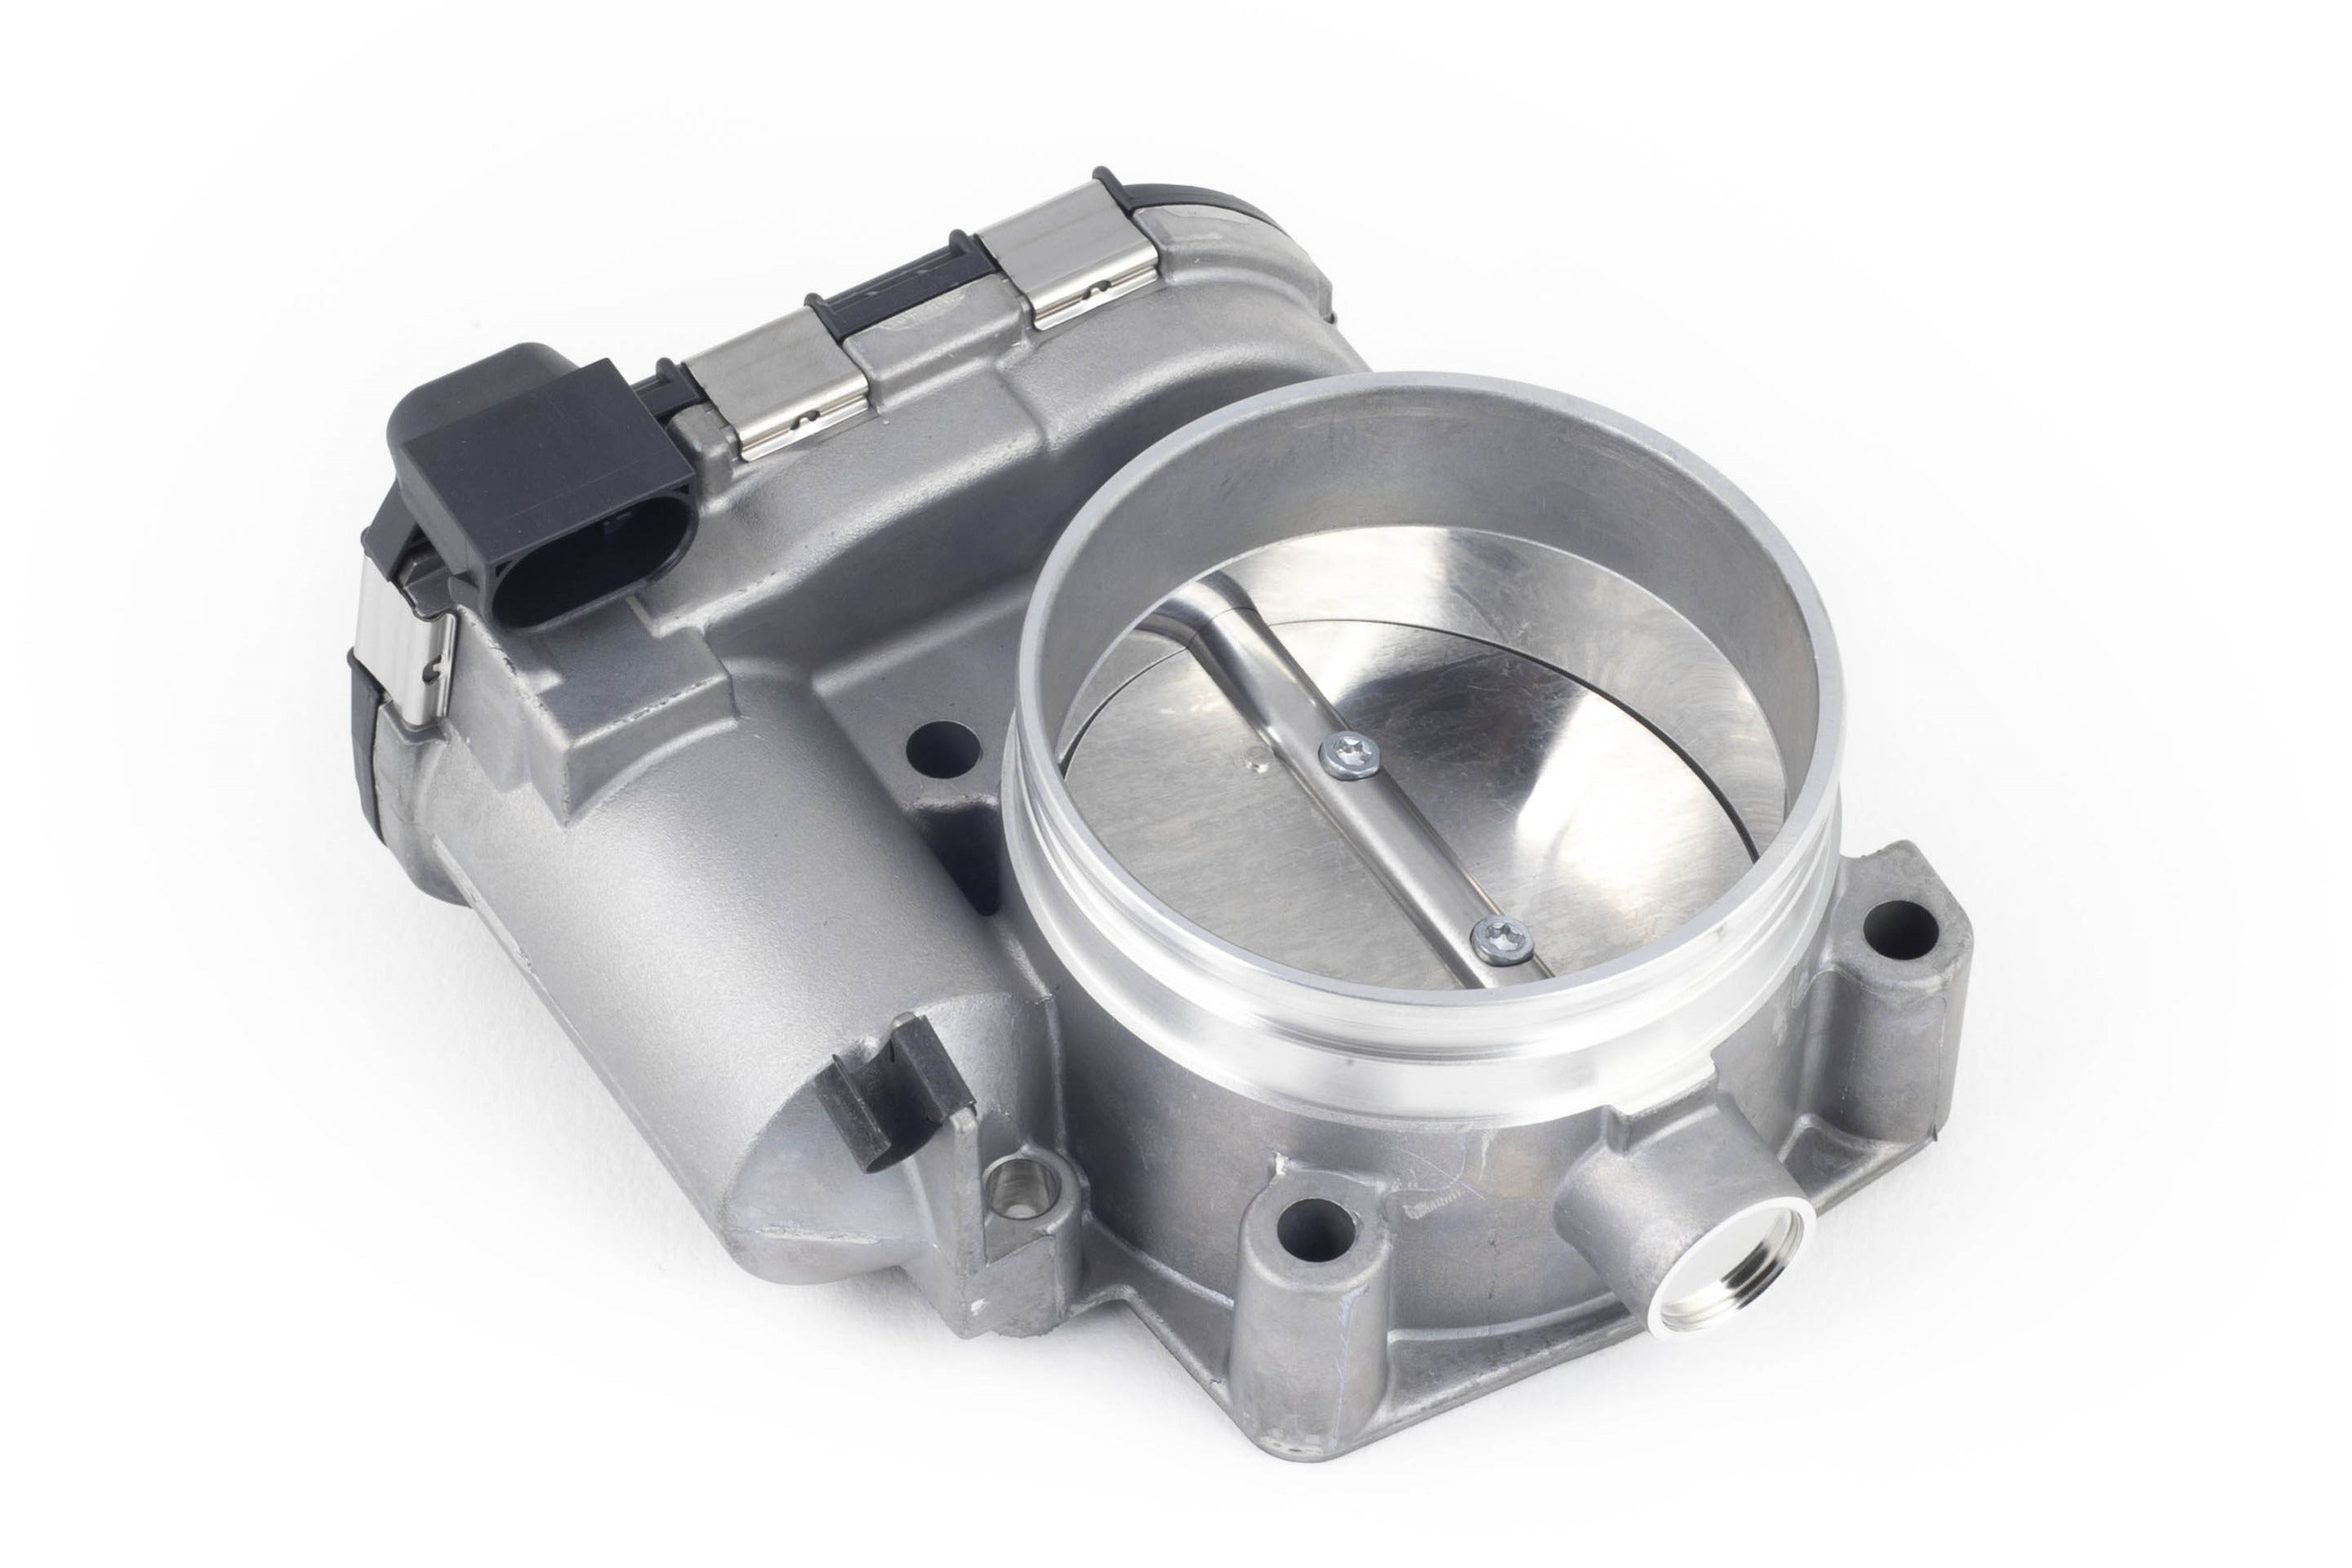 Haltech Bosch - 74mm Electronic Throttle Body - Includes connector and Pins - HT-011802